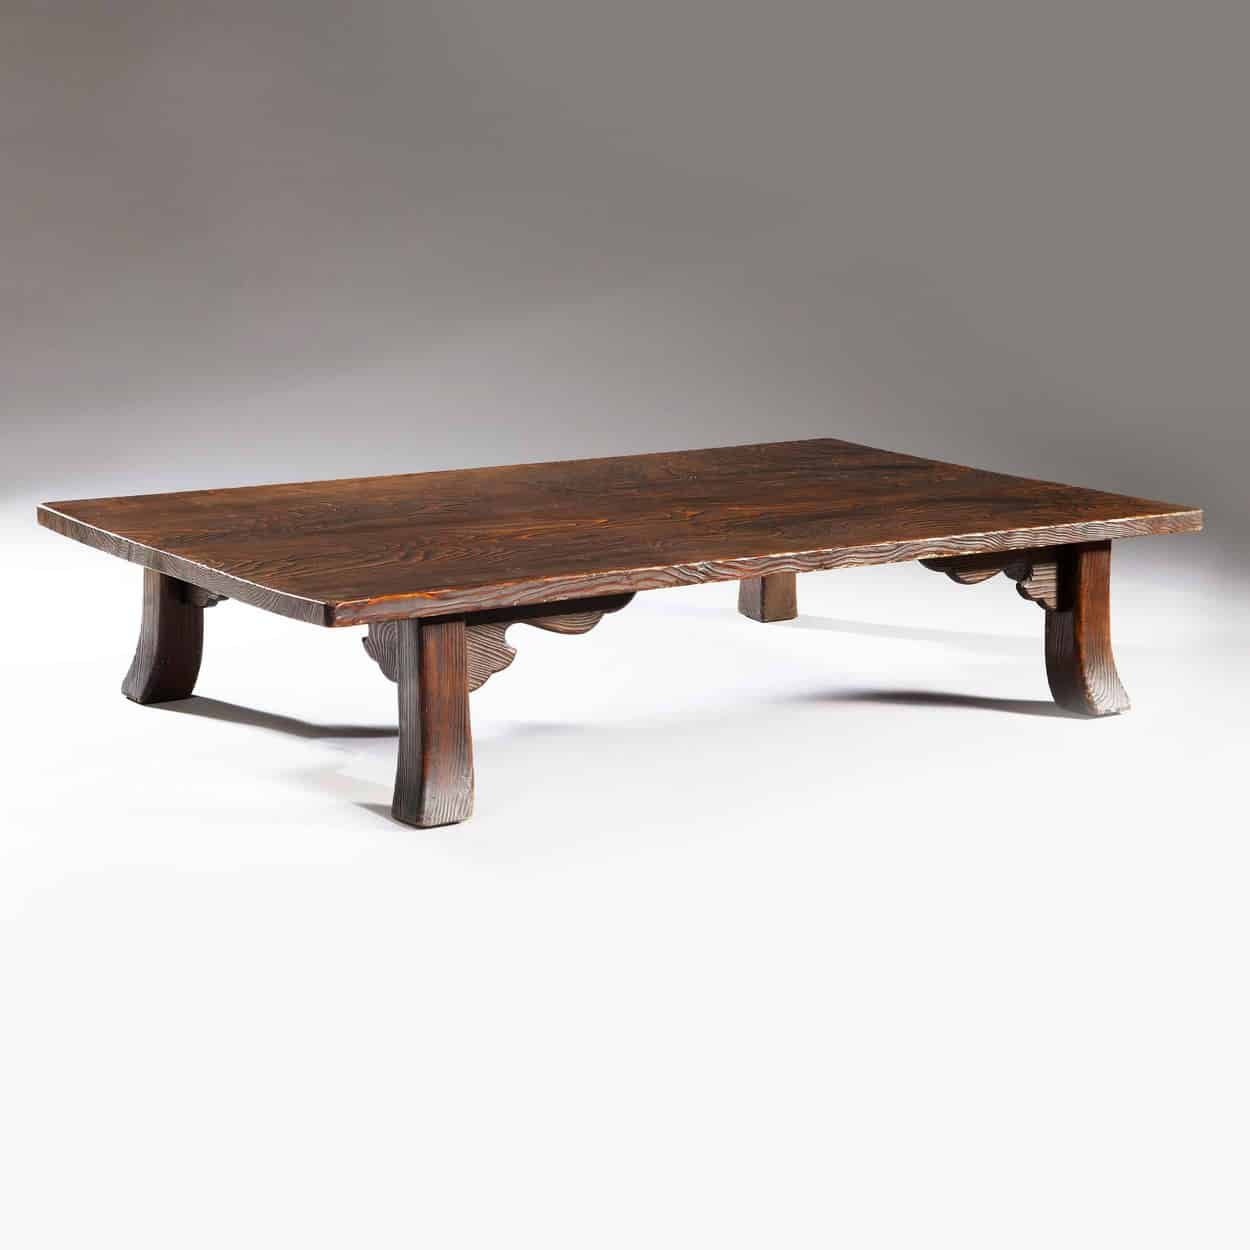 Unique Japanese Low Table Shou Sugi Ban Cedar Wood Coffee Table throughout size 1250 X 1250